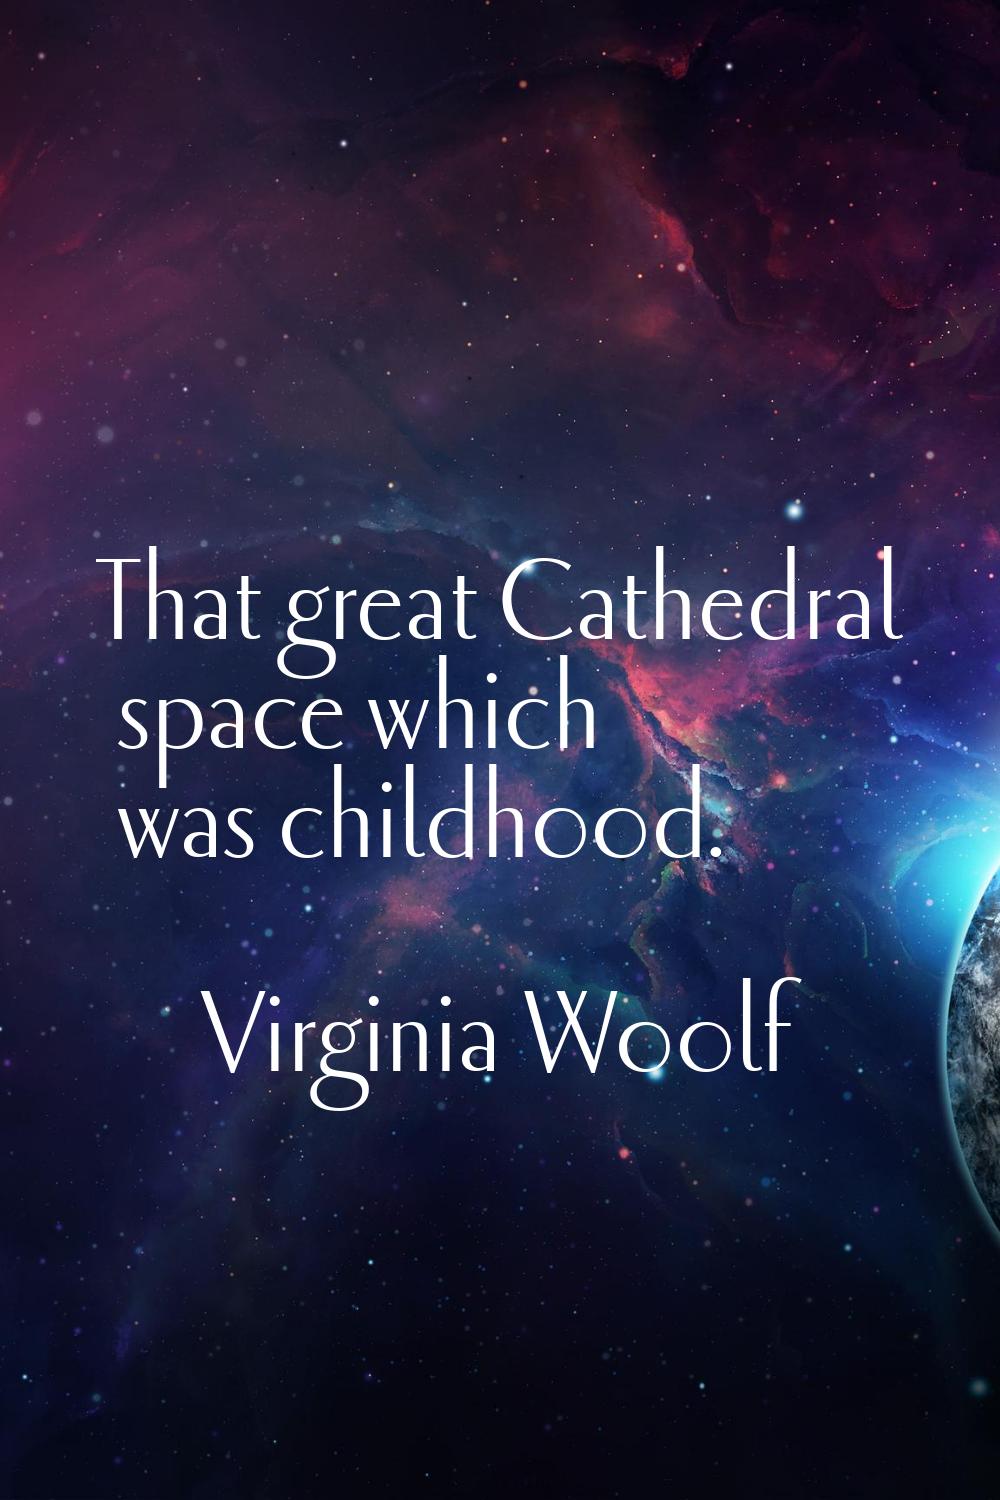 That great Cathedral space which was childhood.